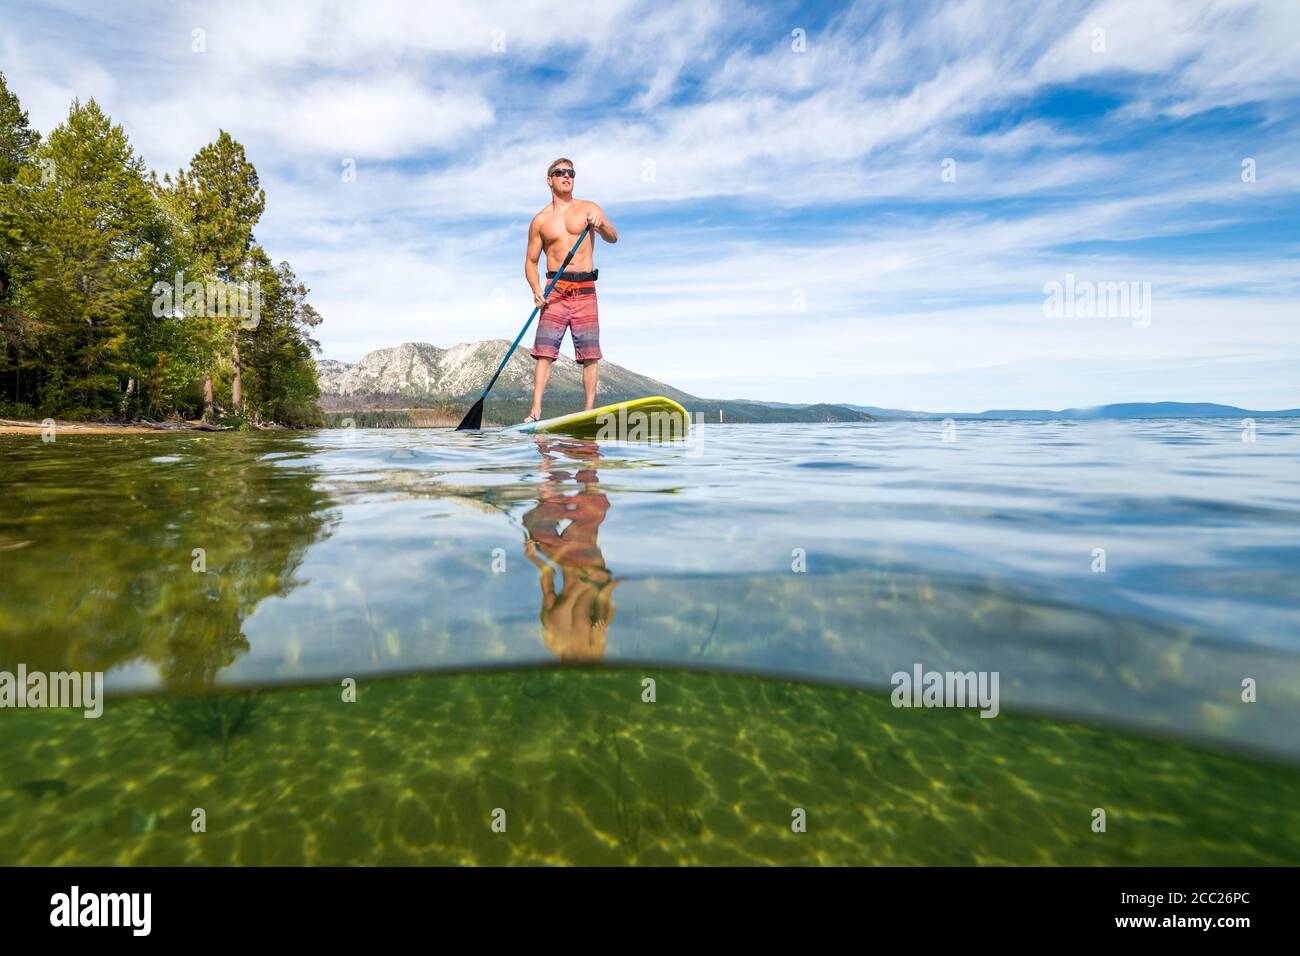 An over-under shot of a man stand-up paddleboarding on a summer day in South Lake Tahoe, California. Stock Photo